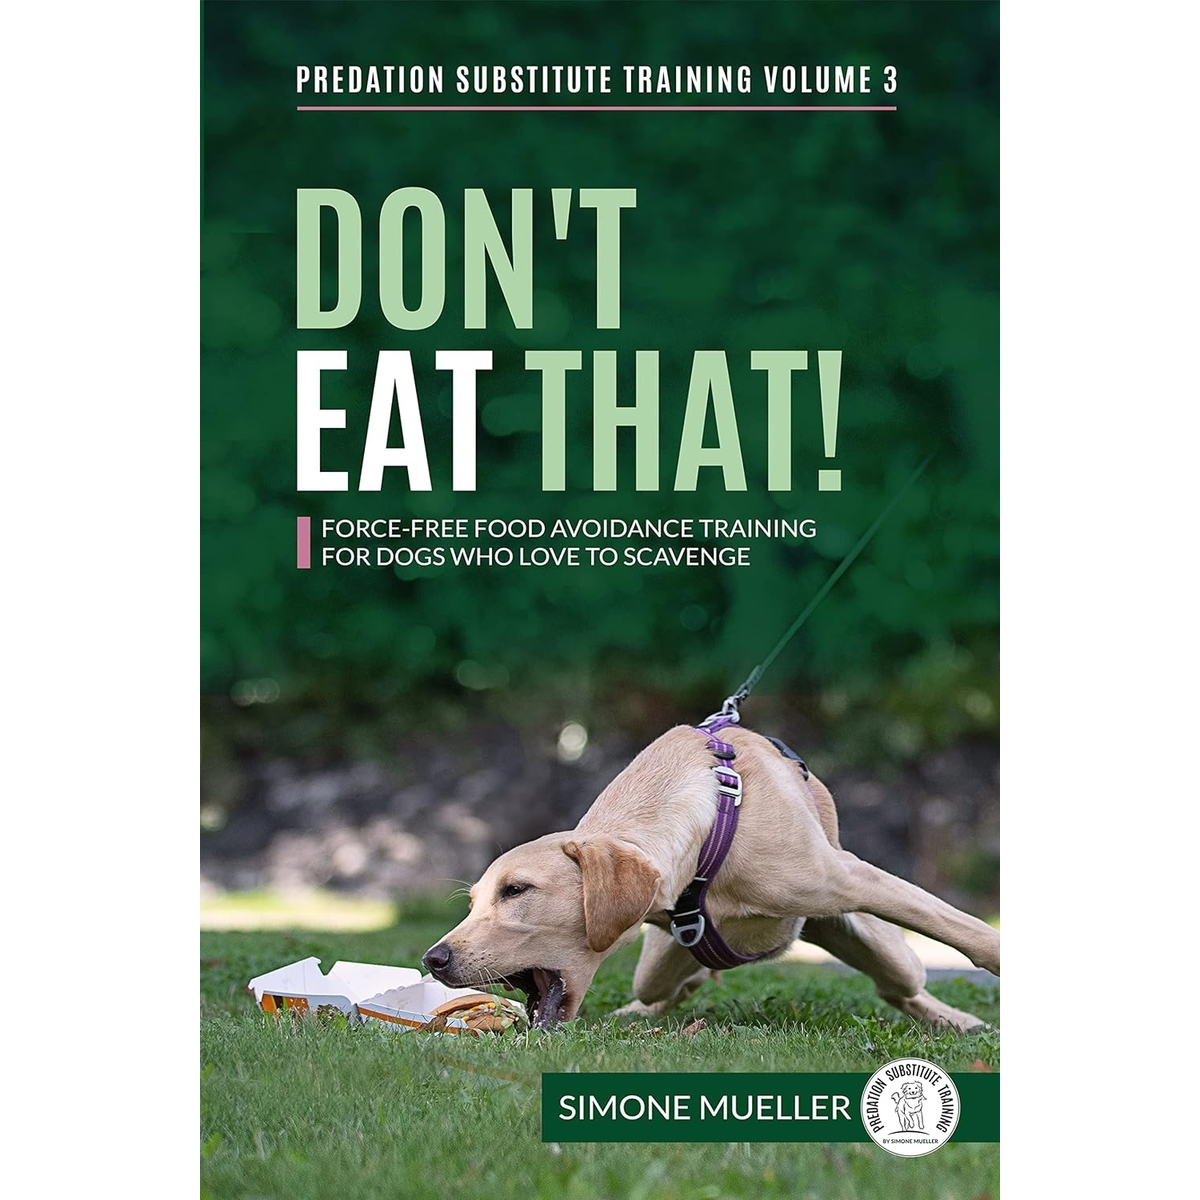 Don't Eat That: Force-Free Food Avoidance Training for Dogs who Love to Scavenge (Predation Substitute Training)  by Simone Mueller Paperback book